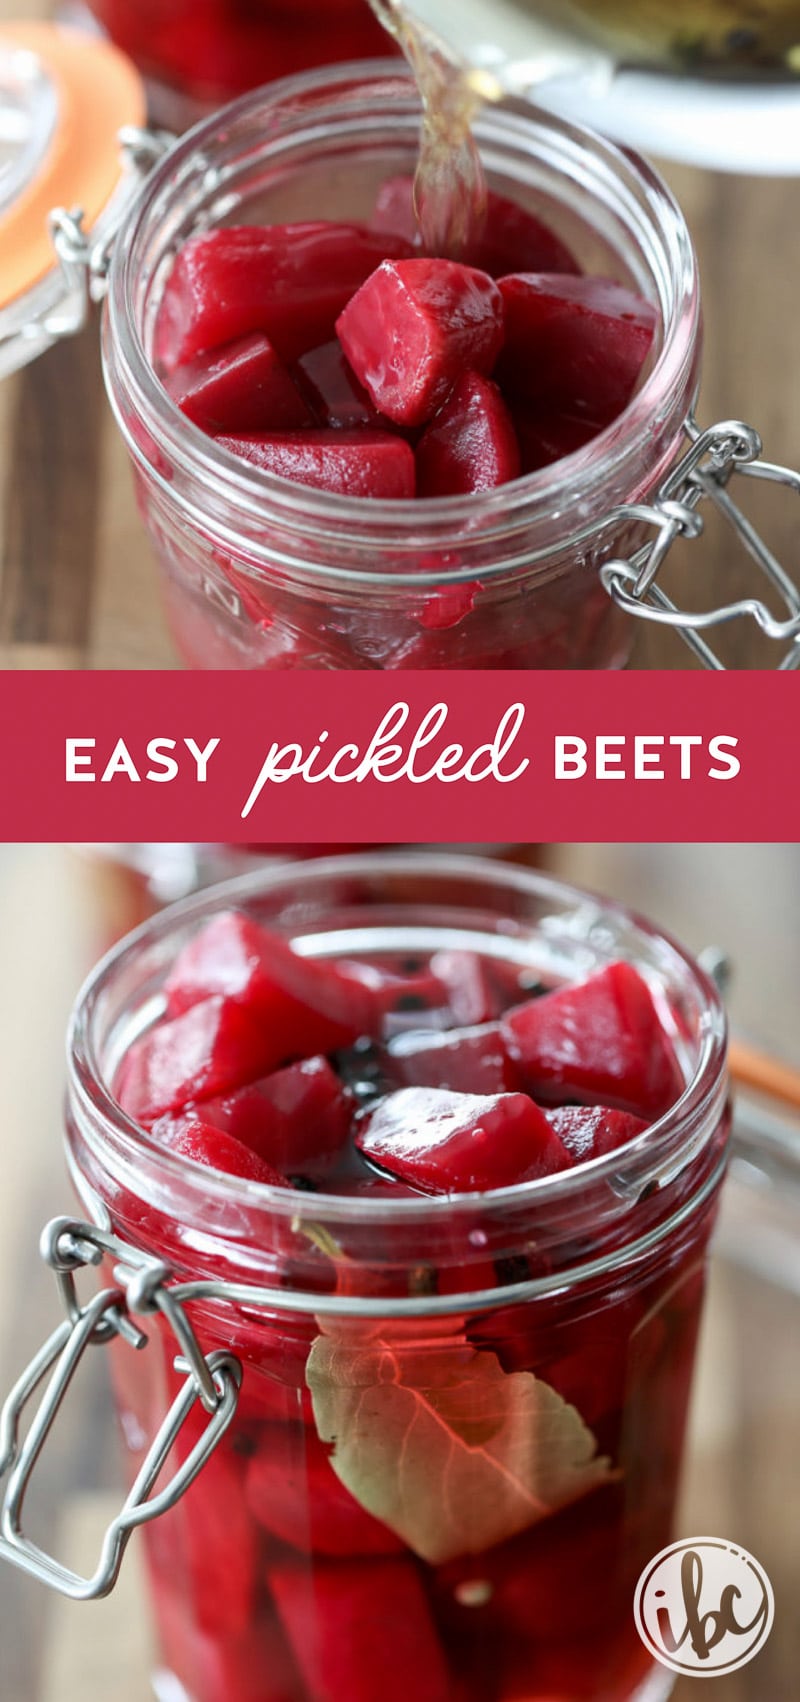 How to make Easy Pickled Beets. These #pickled #beets make a great #appetizer, side dish, or topping for a salad!